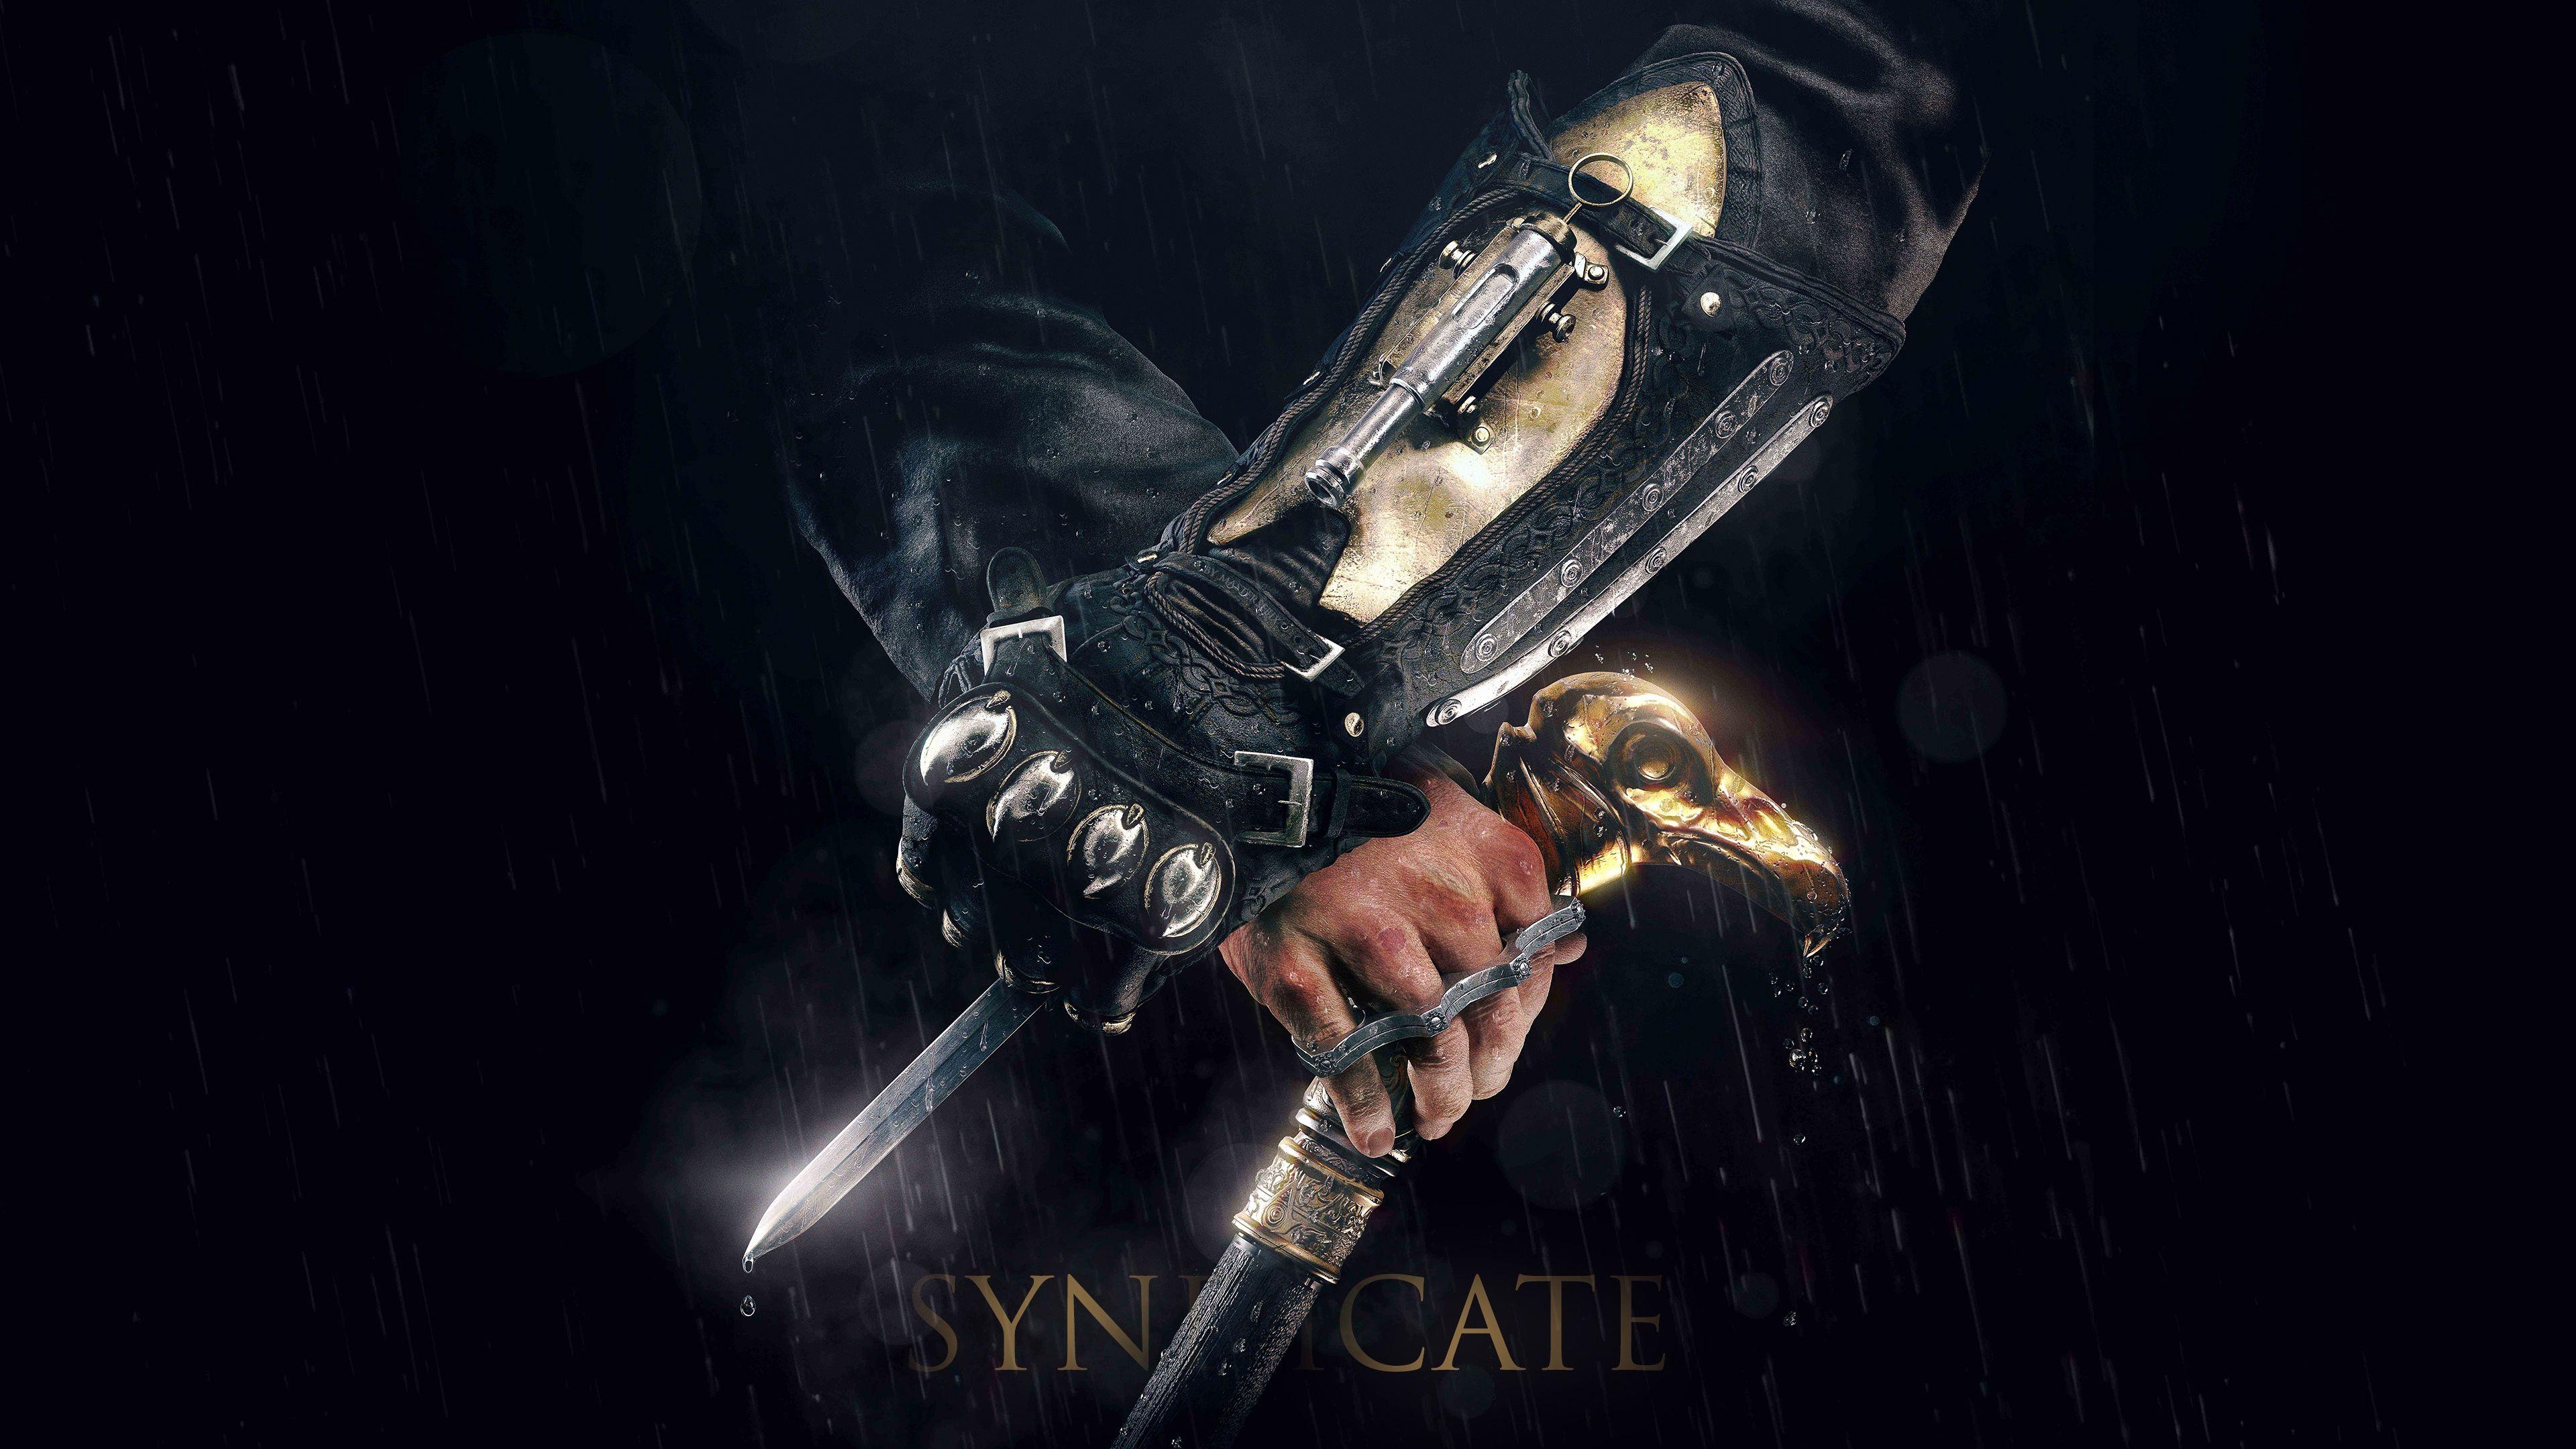 Download wallpaper 3840x2160 assassins creed, syndicate, jacob frye